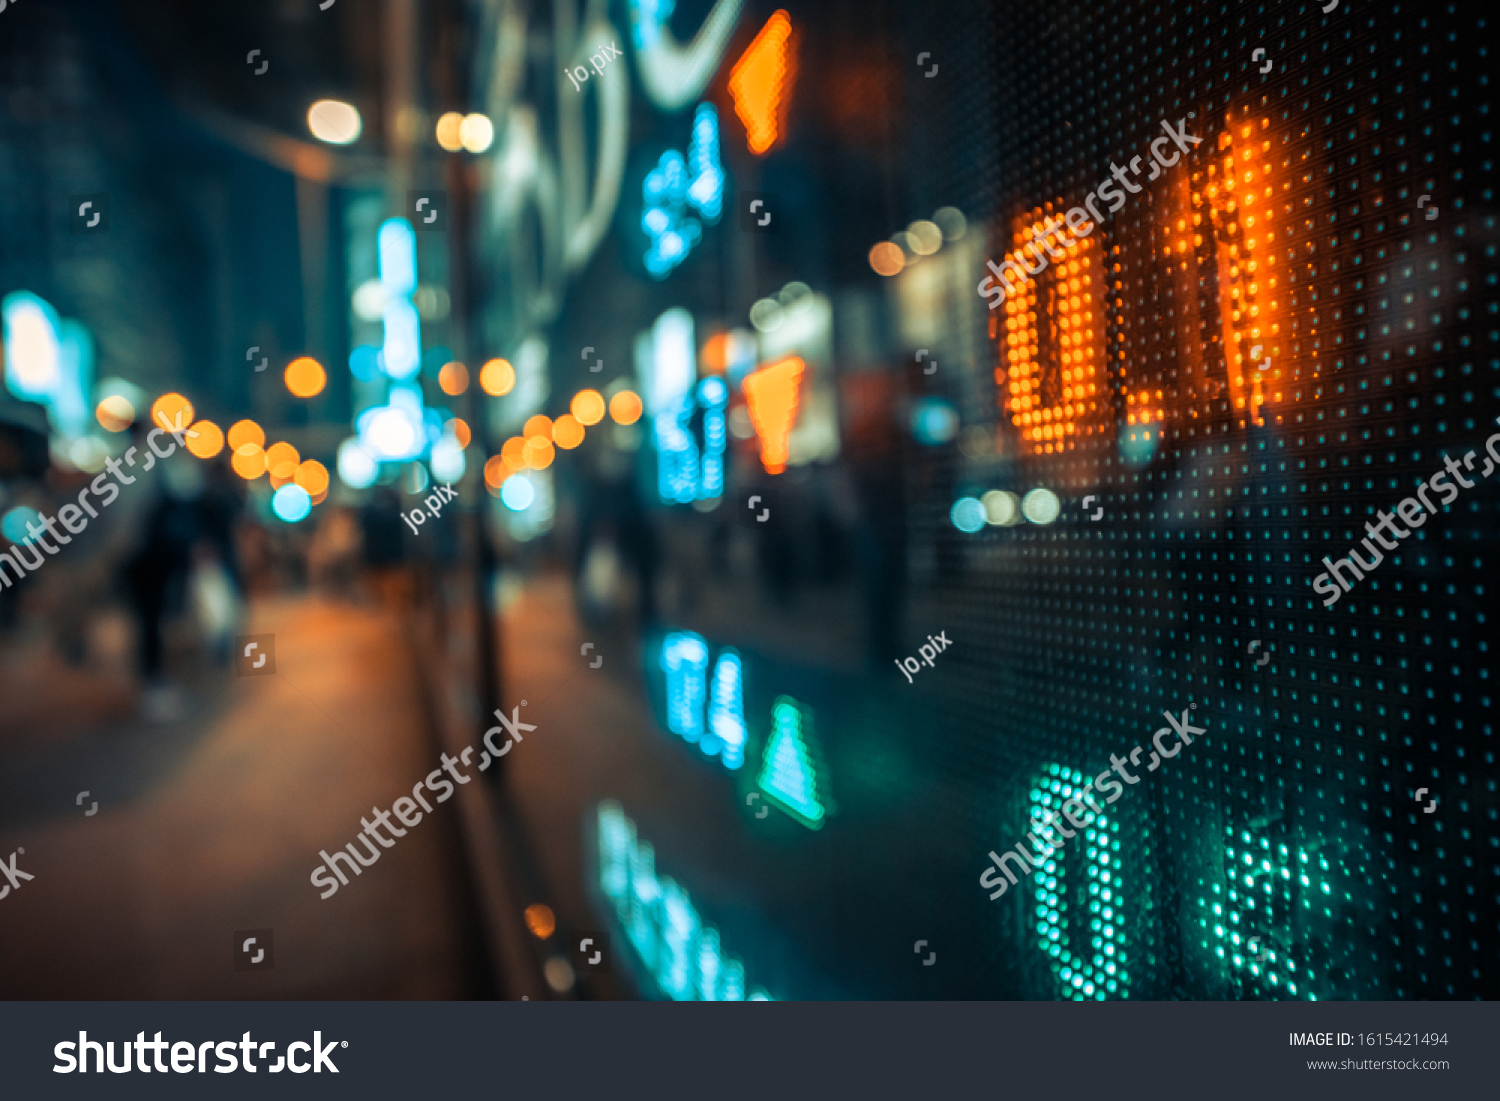 Display stock market numbers and graph with city light reflections at the street. Small focus line, some noise. Blurry. #1615421494